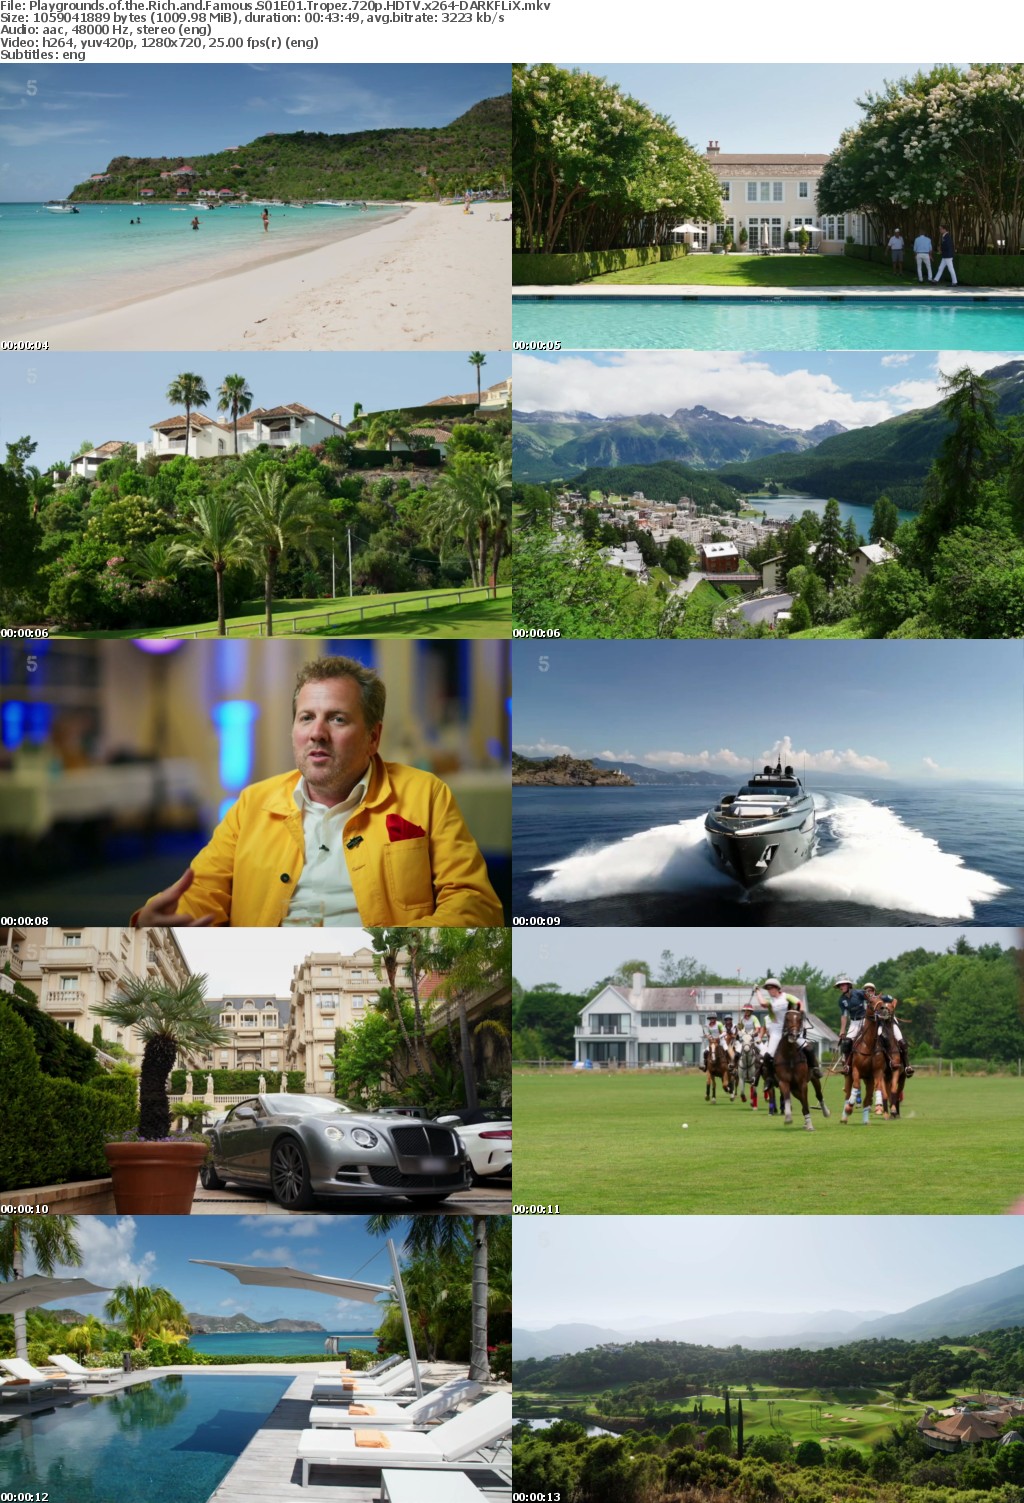 Playgrounds of the Rich and Famous S01E01 Tropez 720p HDTV x264-DARKFLiX